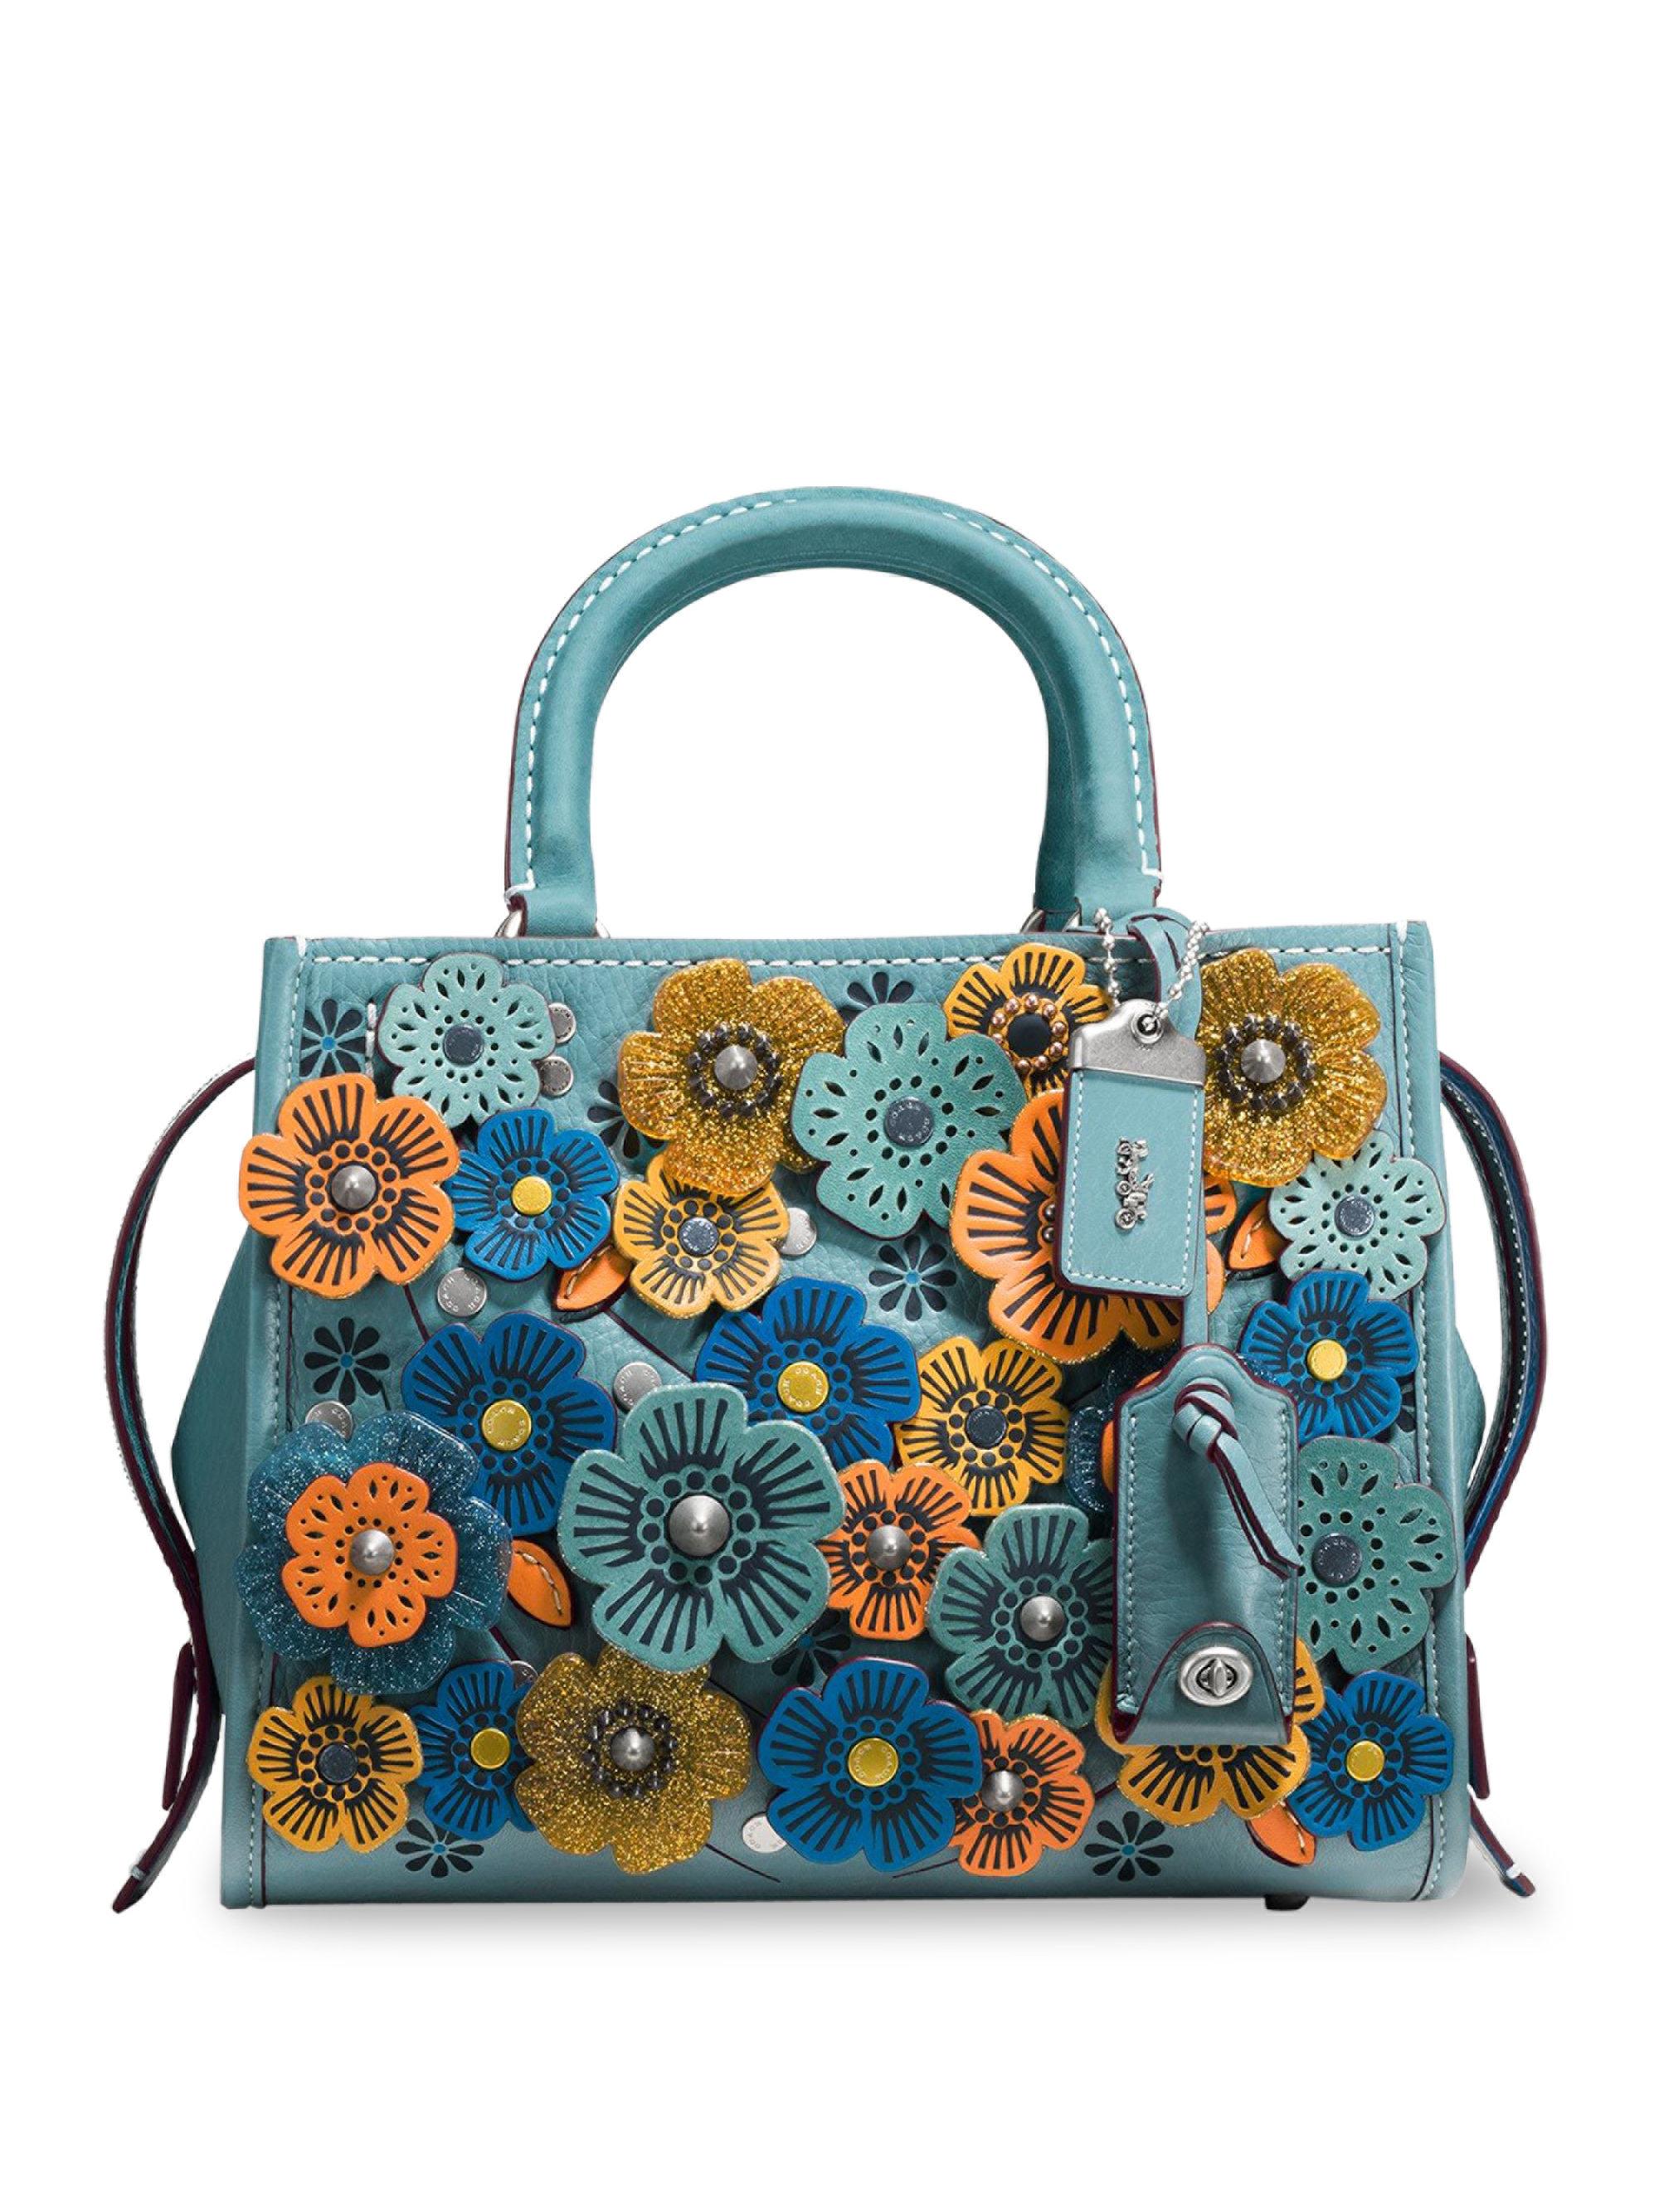 Discover more than 73 coach floral leather bags - esthdonghoadian